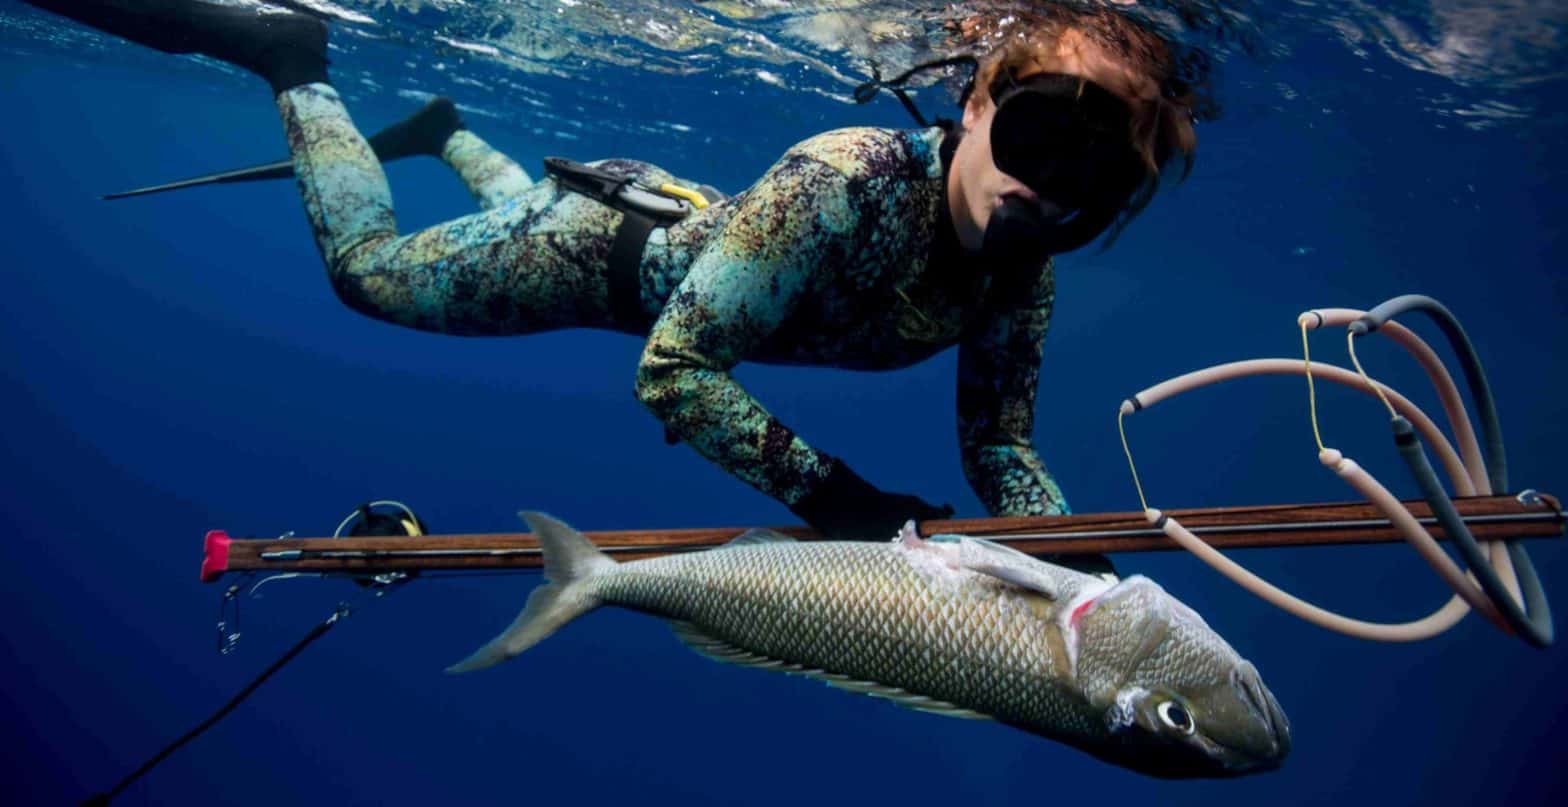 Underwater Fishing with a Pole Spear